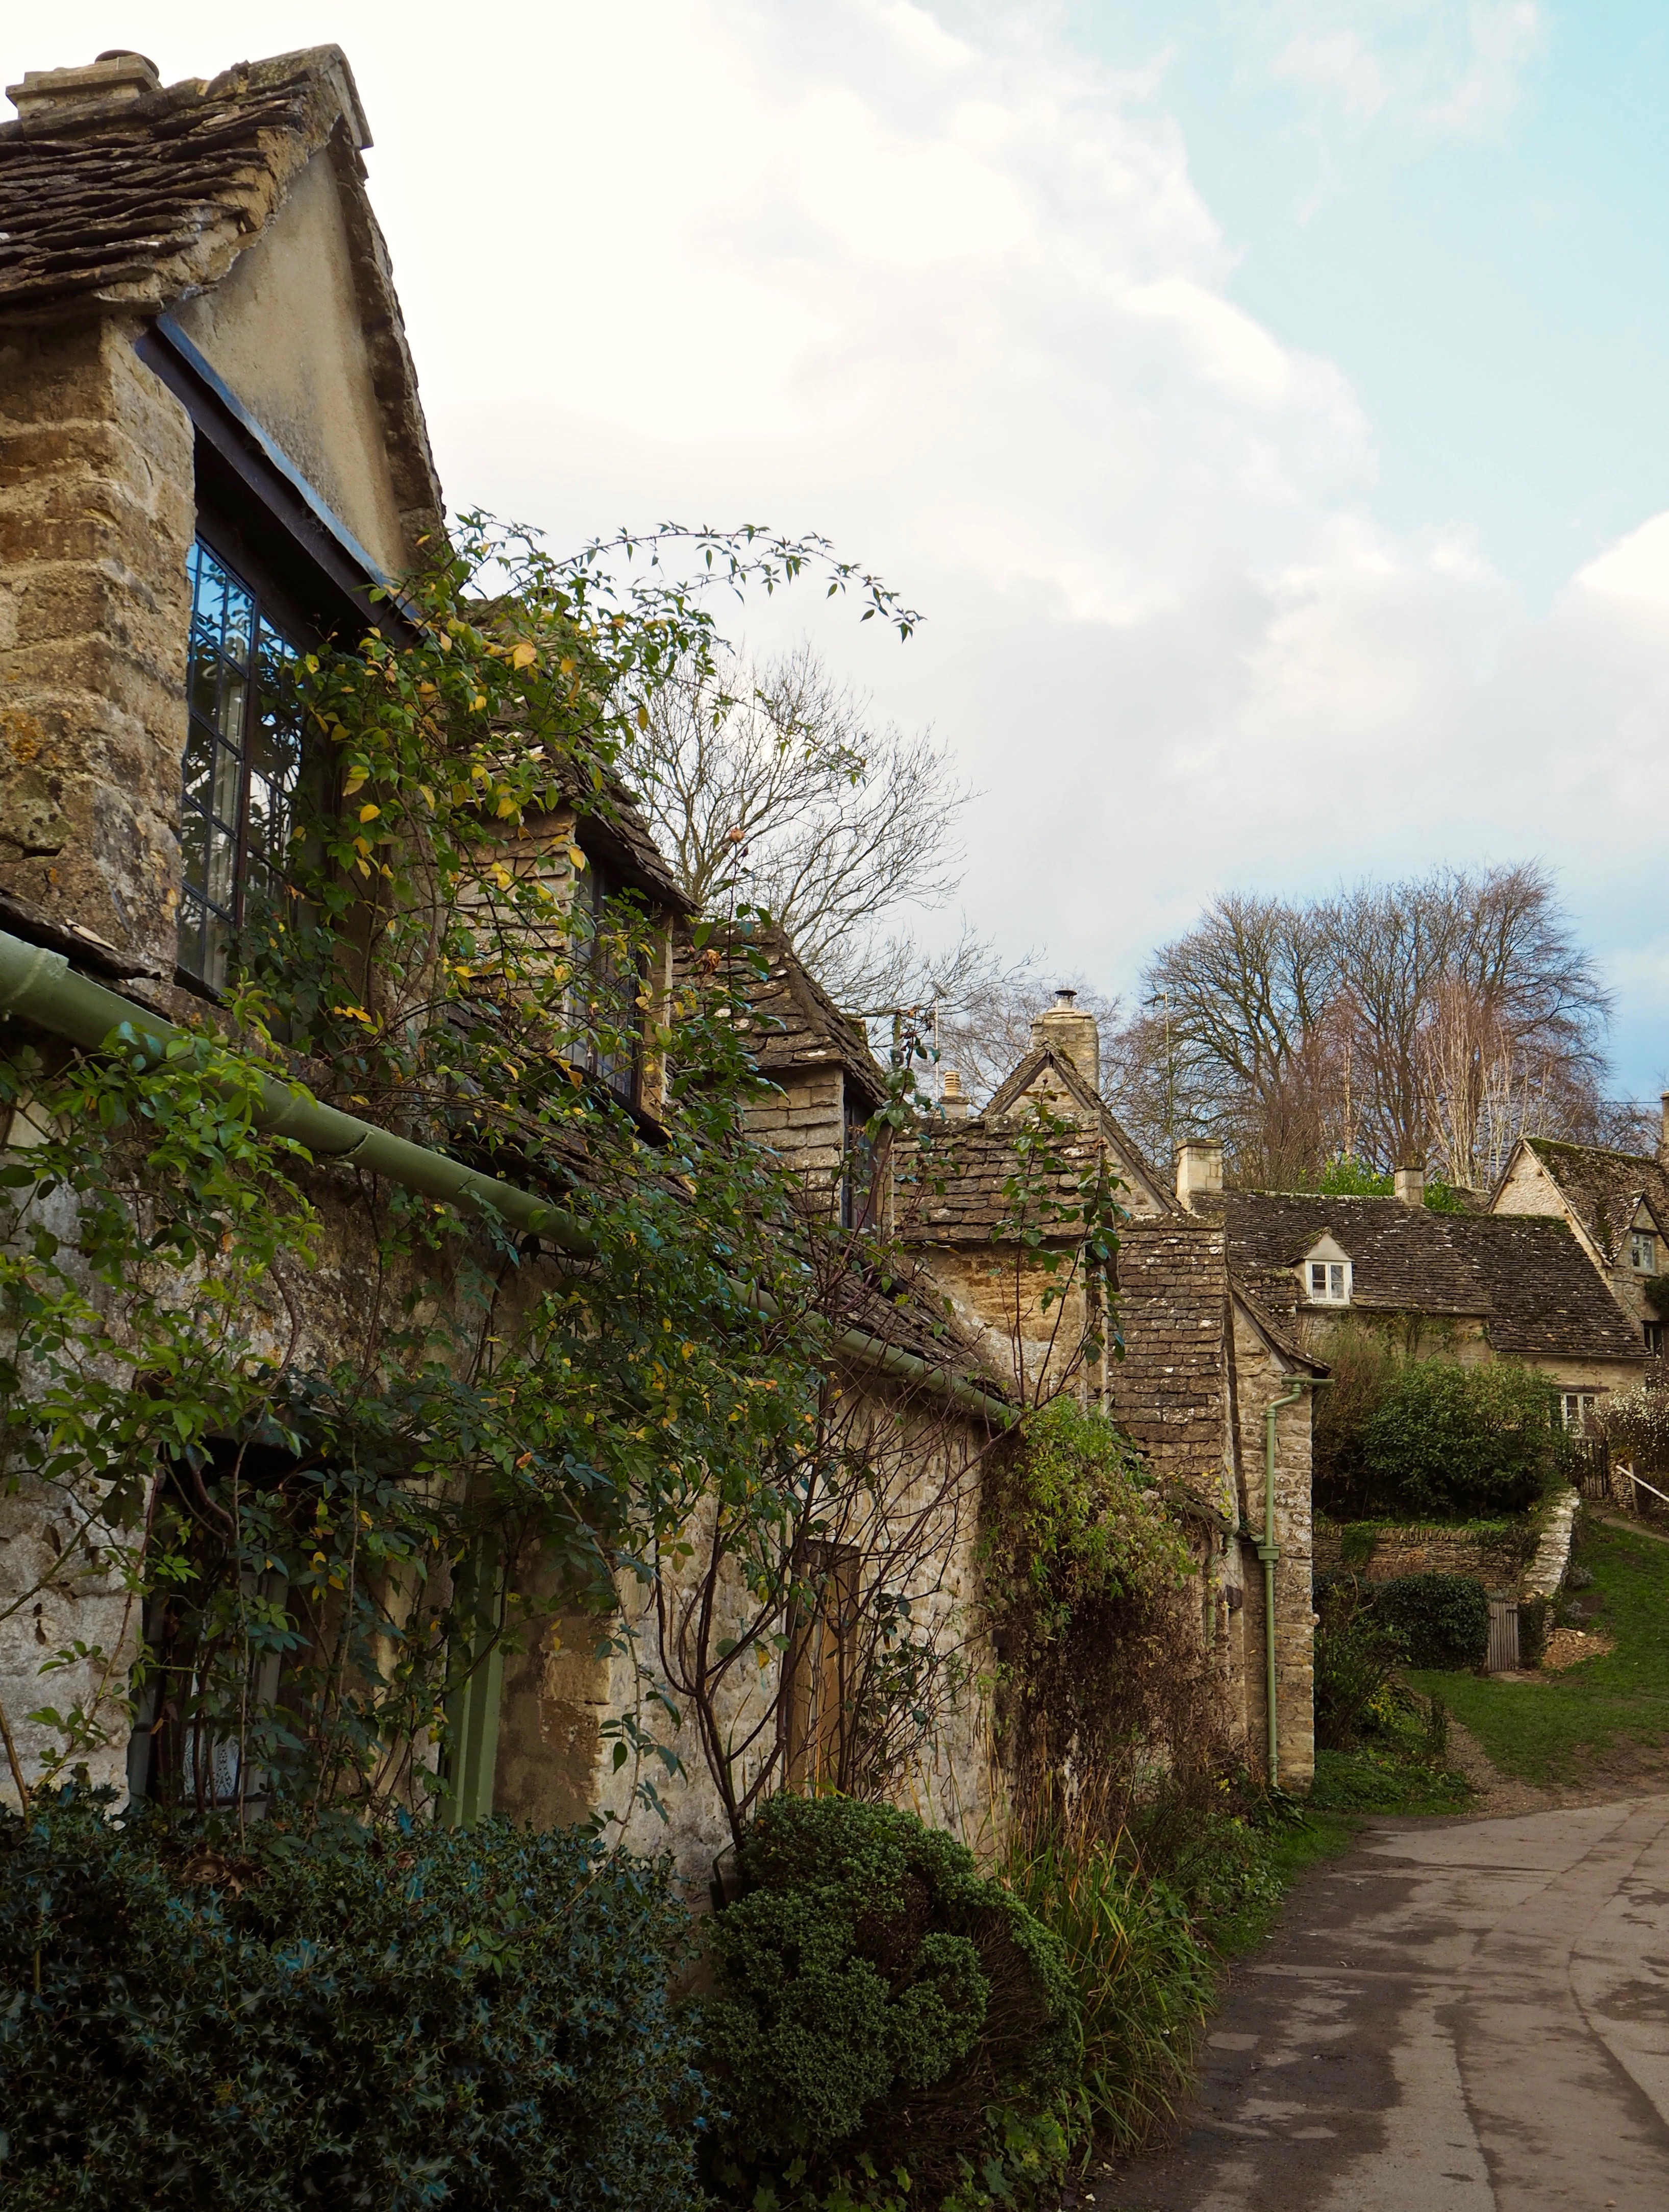 Arlington Row, Bibury - A Day Trip to Oxford and the Cotswolds with Rabbie's Tours